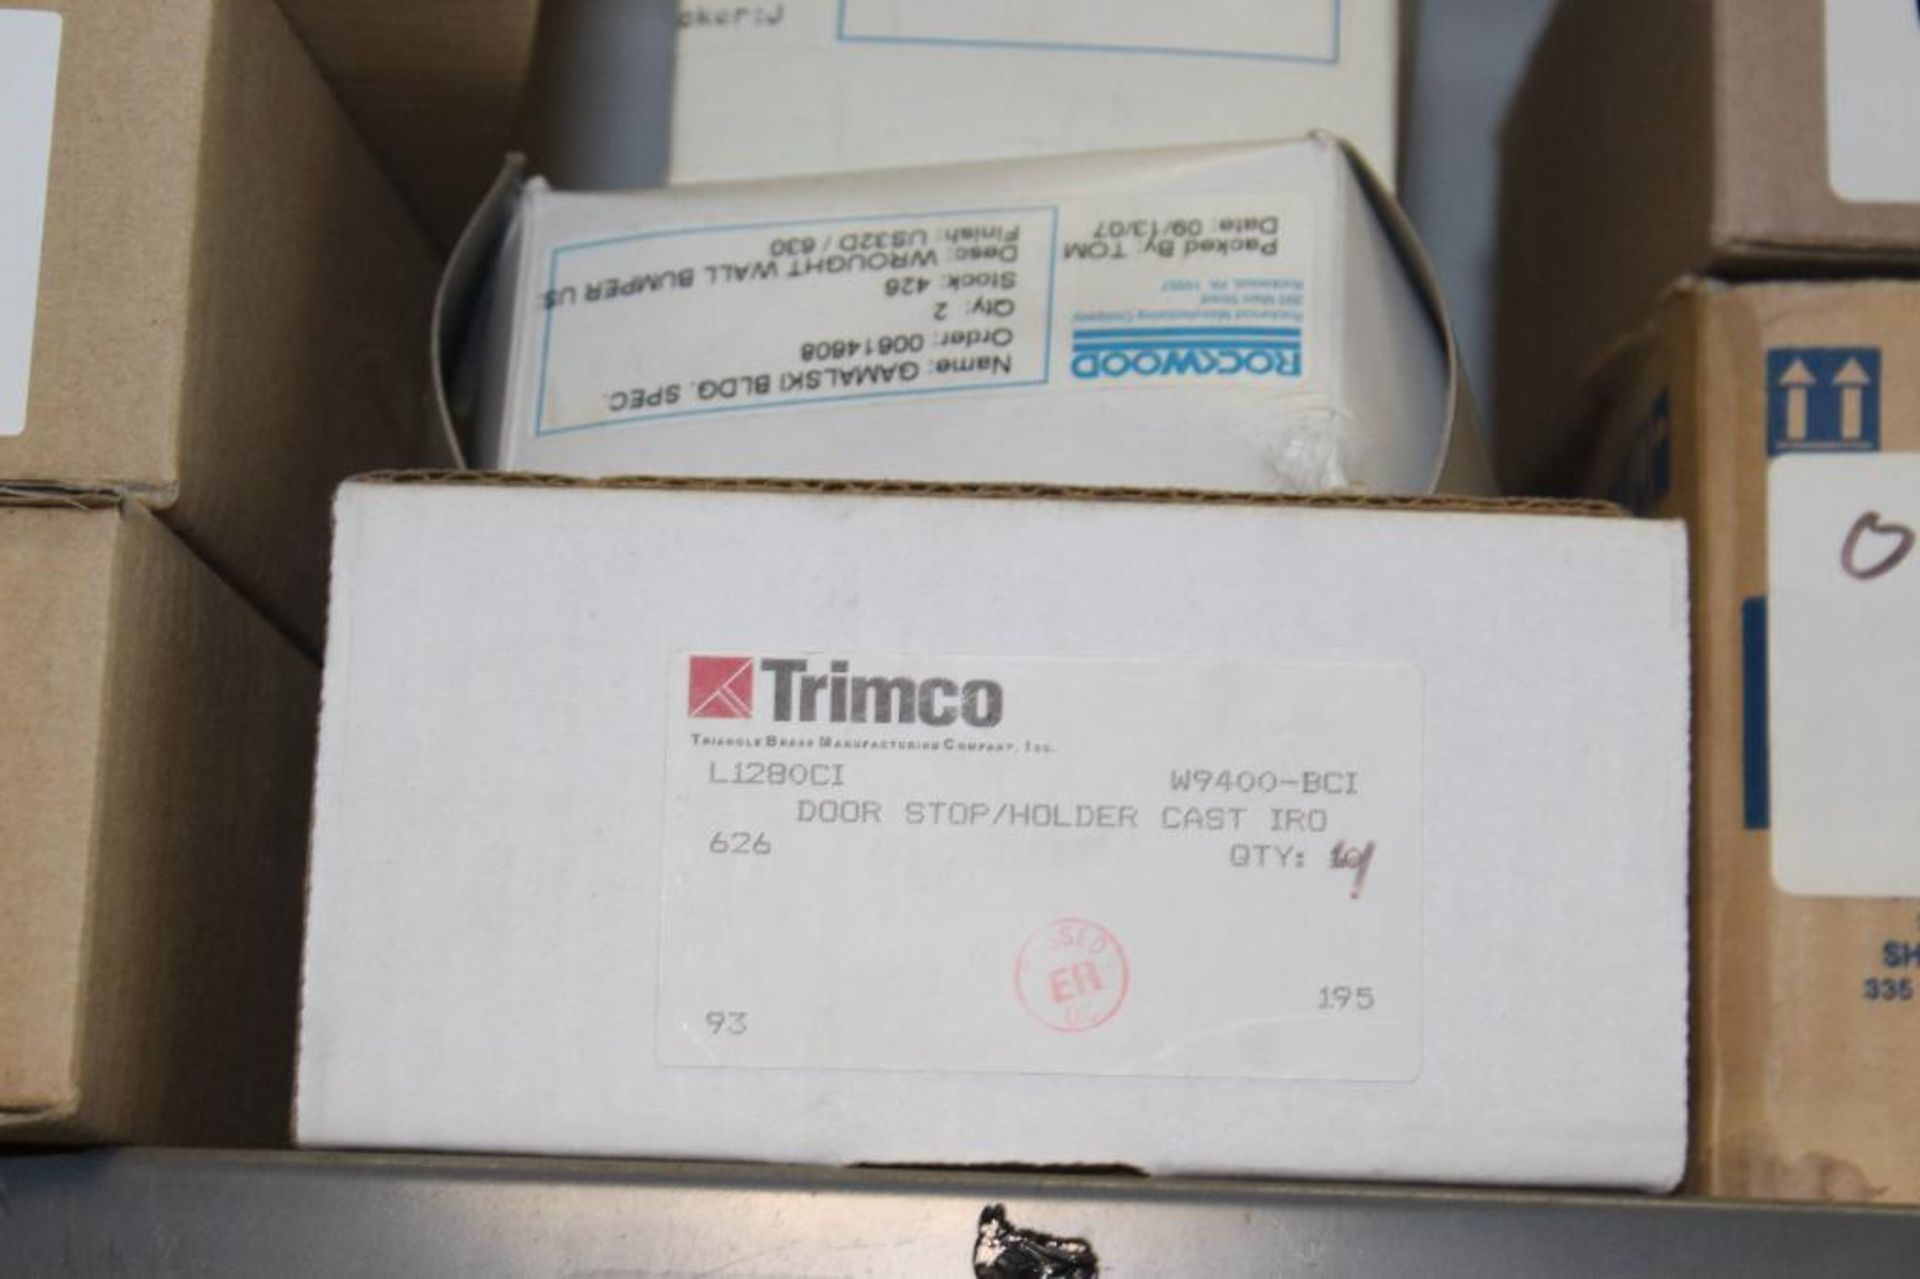 Lot of Rockwood Trimco and Misc. Wall Stops, Wall Bumps and Adhesive Wall Stops - Image 3 of 9